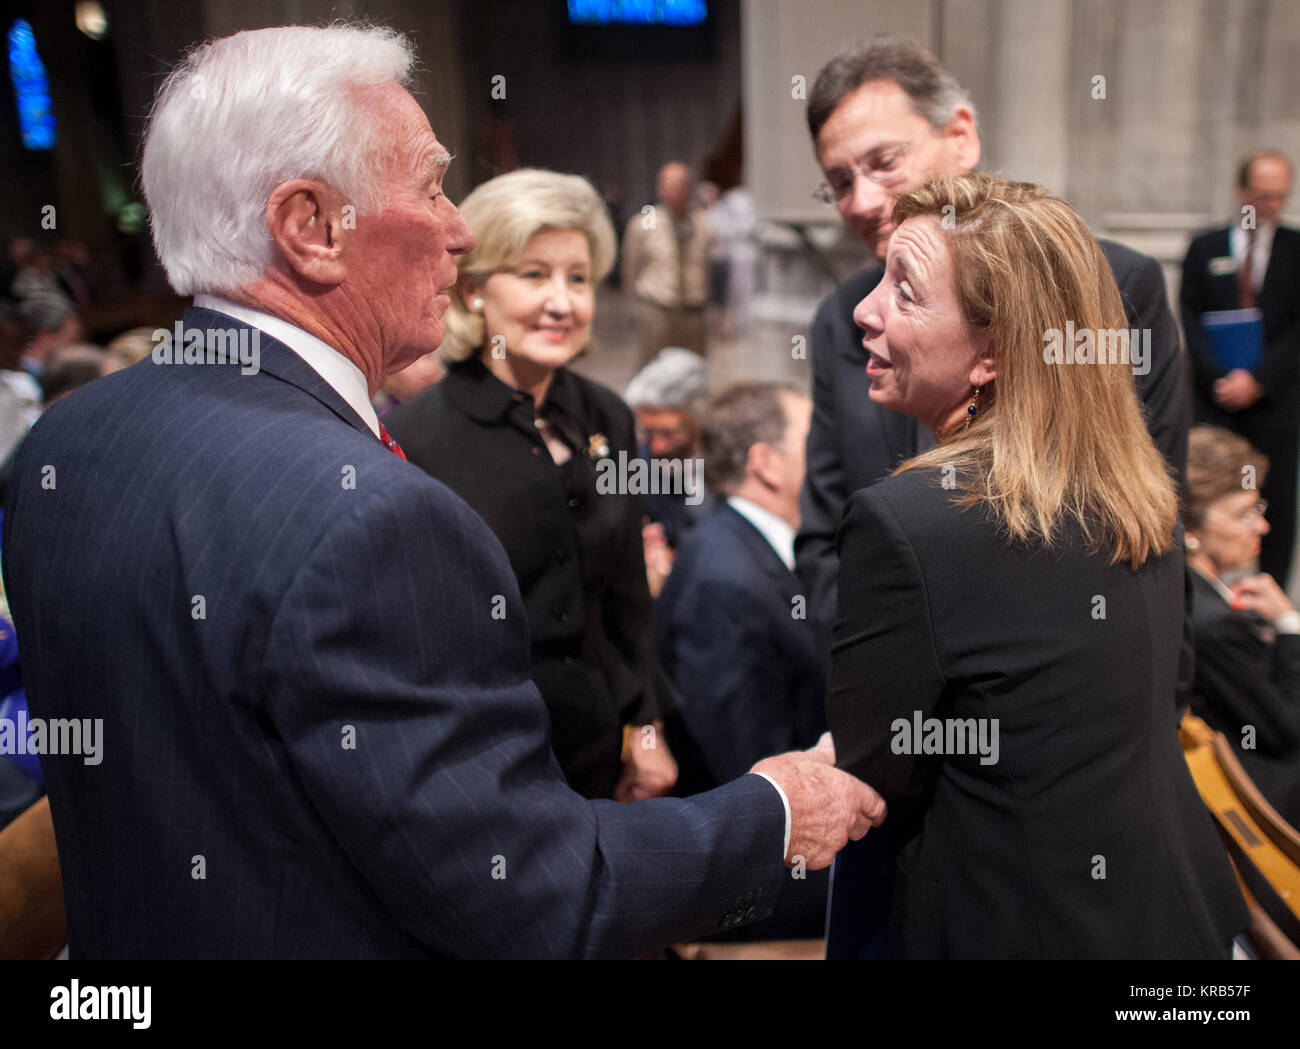 NASA Deputy Administrator Lori Garver, right, shares a moment with Apollo 17 mission commander Gene Cernan, the last man to walk on the moon, left, as U.S. Sen. Kay Bailey Hutchison, R-Texas, center looks on prior to a memorial service celebrating the life of Neil Armstrong, Thursday, Sept. 13, 2012, at the Washington National Cathedral. Armstrong, the first man to walk on the moon during the 1969 Apollo 11 mission, died Saturday, Aug. 25. He was 82. Photo Credit: (NASA/Bill Ingalls) Neil Armstrong public memorial service (201209130006HQ) Stock Photo